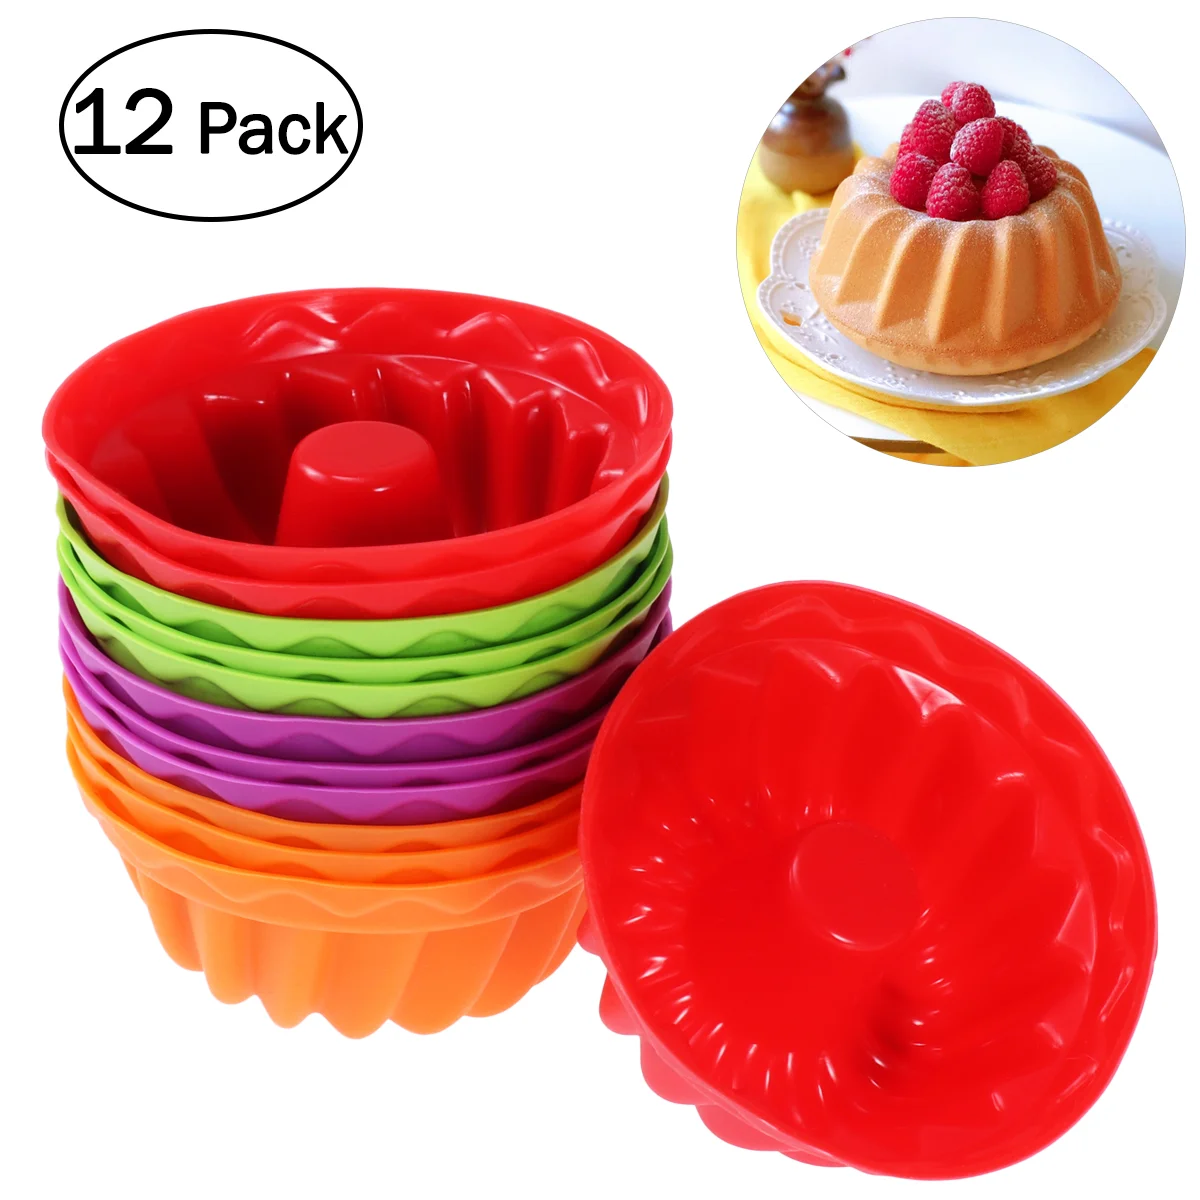 

12PCS Silicone Cake Pan Mould Non- Muffin Liners Molds Sets Flower Cupcake Mold ( Random Colors )